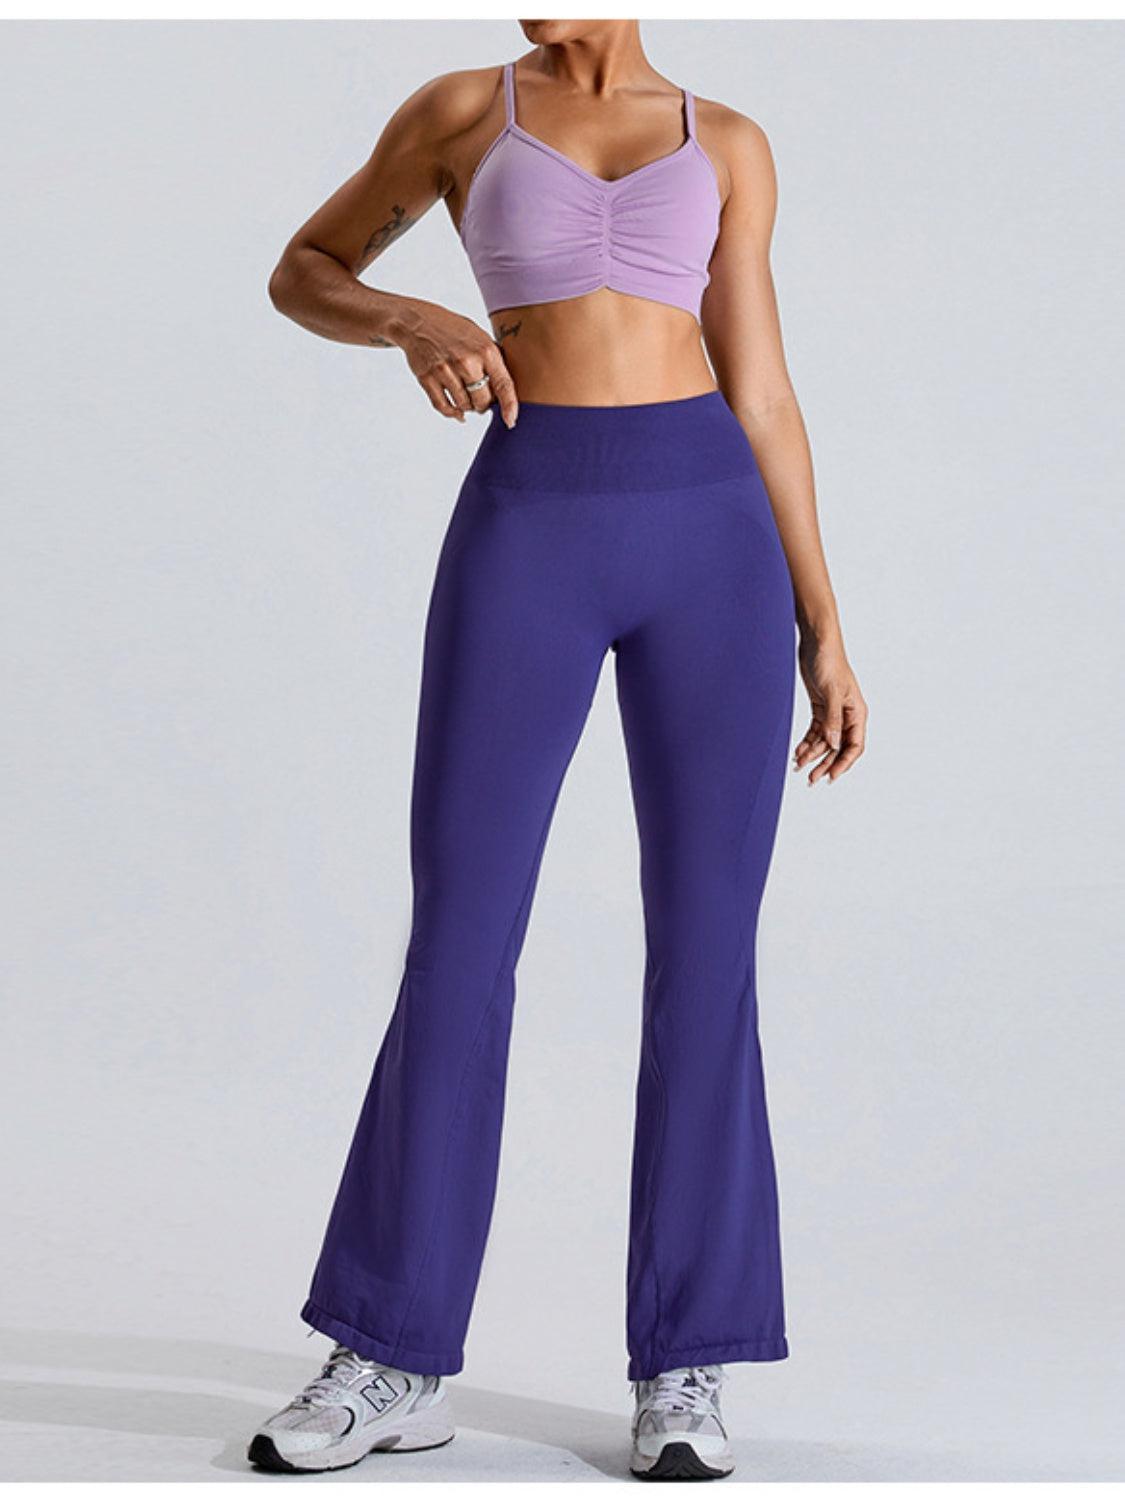 a woman in a sports bra top and purple pants